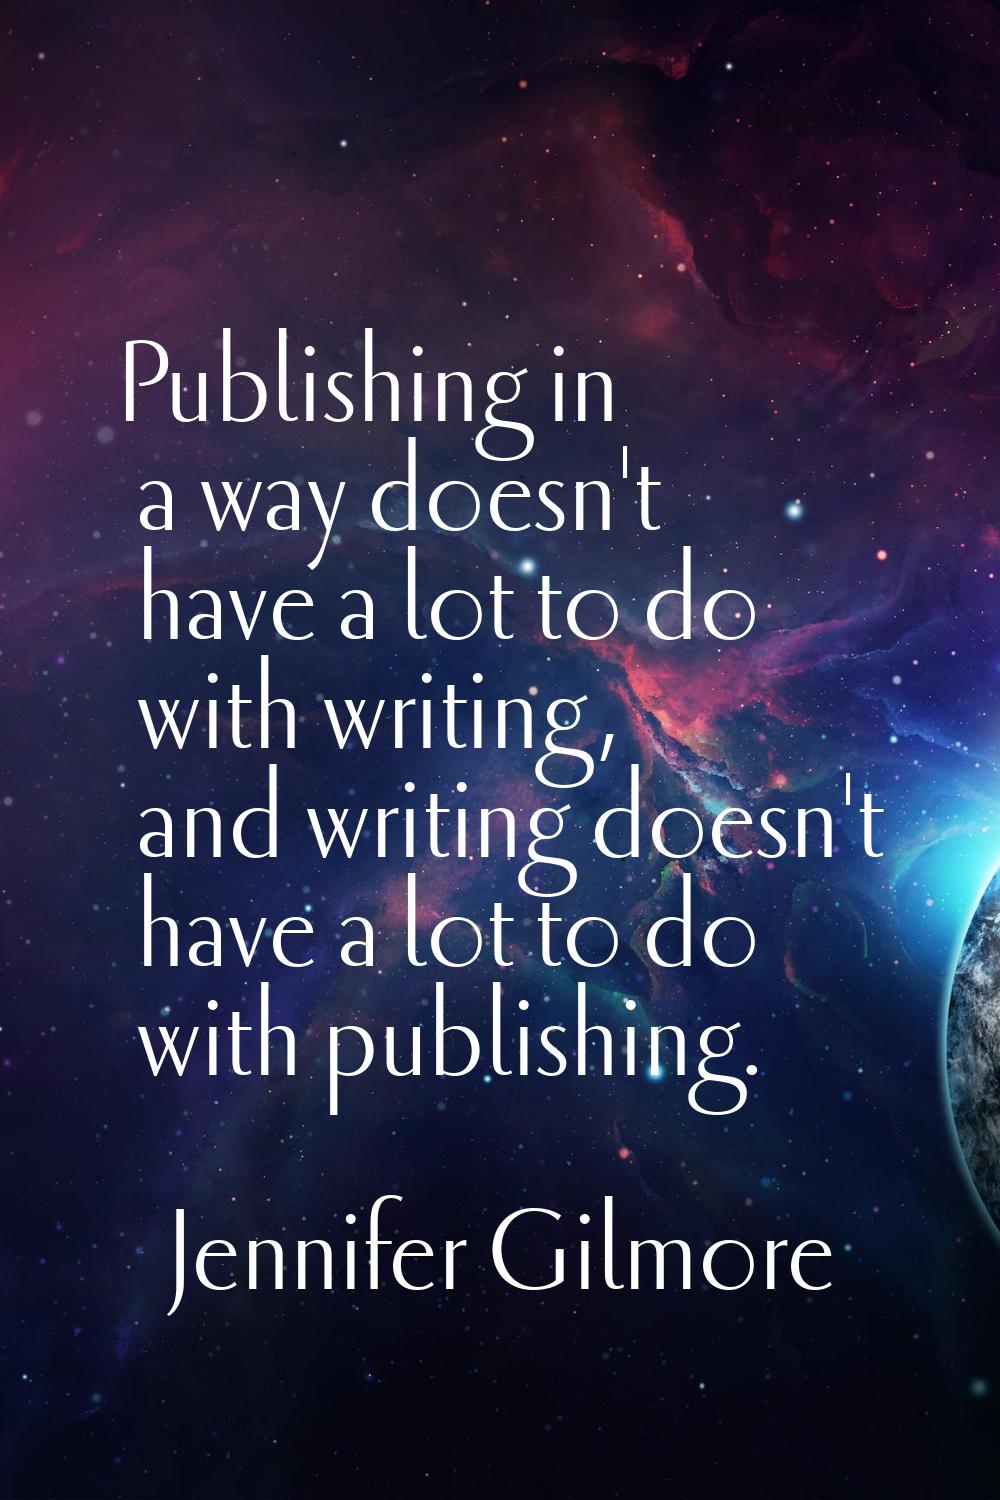 Publishing in a way doesn't have a lot to do with writing, and writing doesn't have a lot to do wit